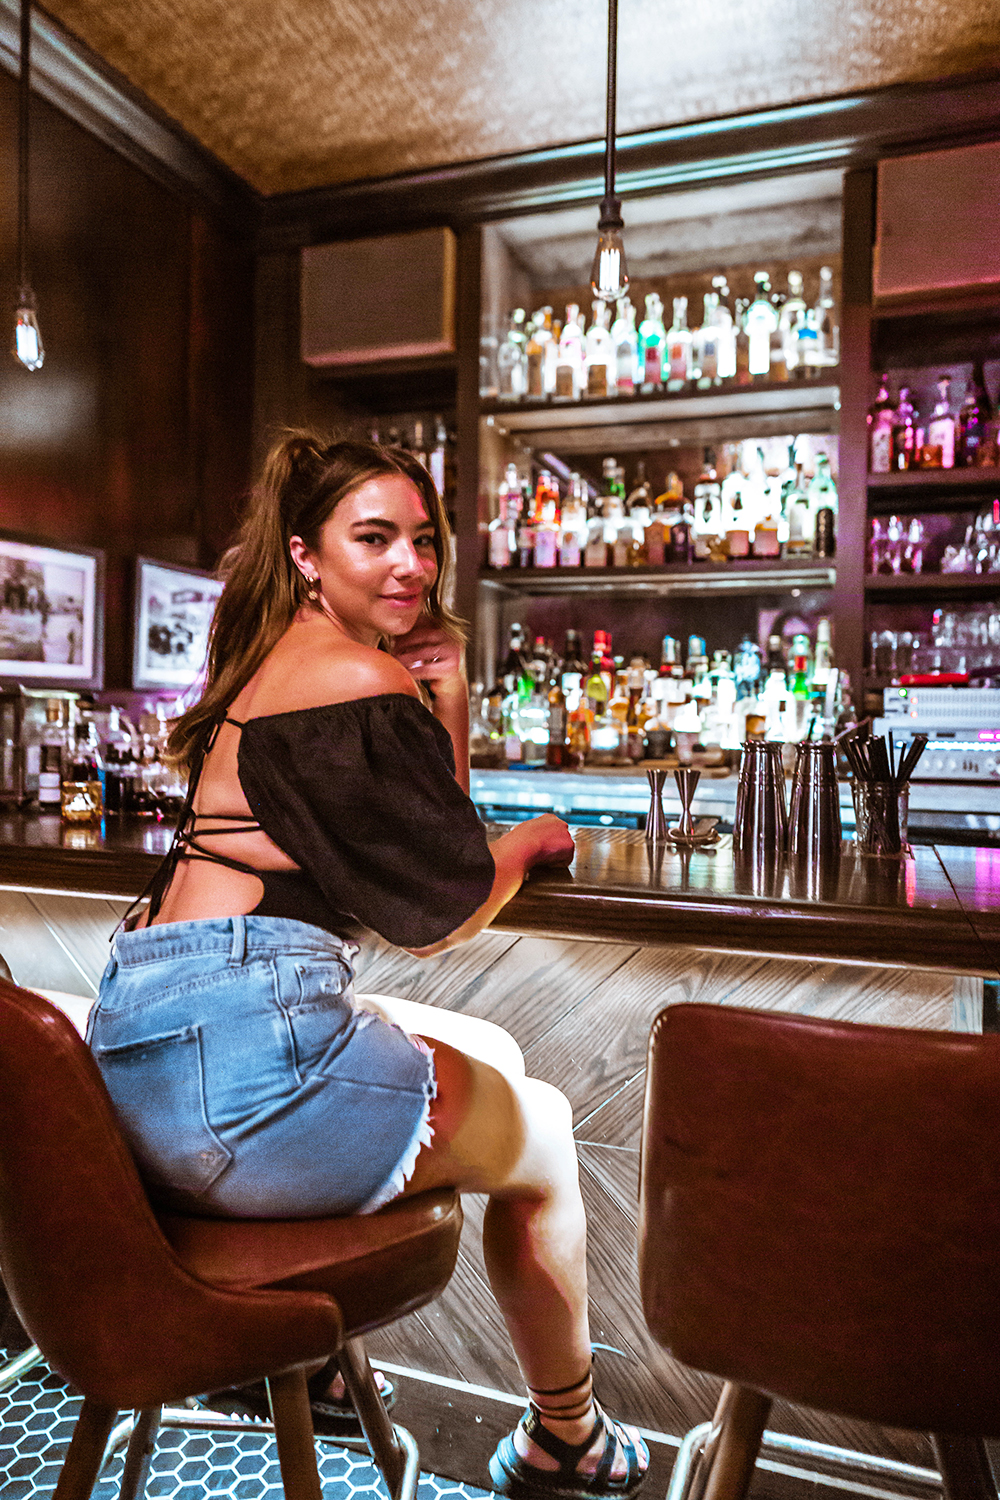 A woman (Lauryncakes) turns around on a barstool. She's wearing a backless bodysuit, denim shorts, and lace-up sandals with her hair in a ponytail